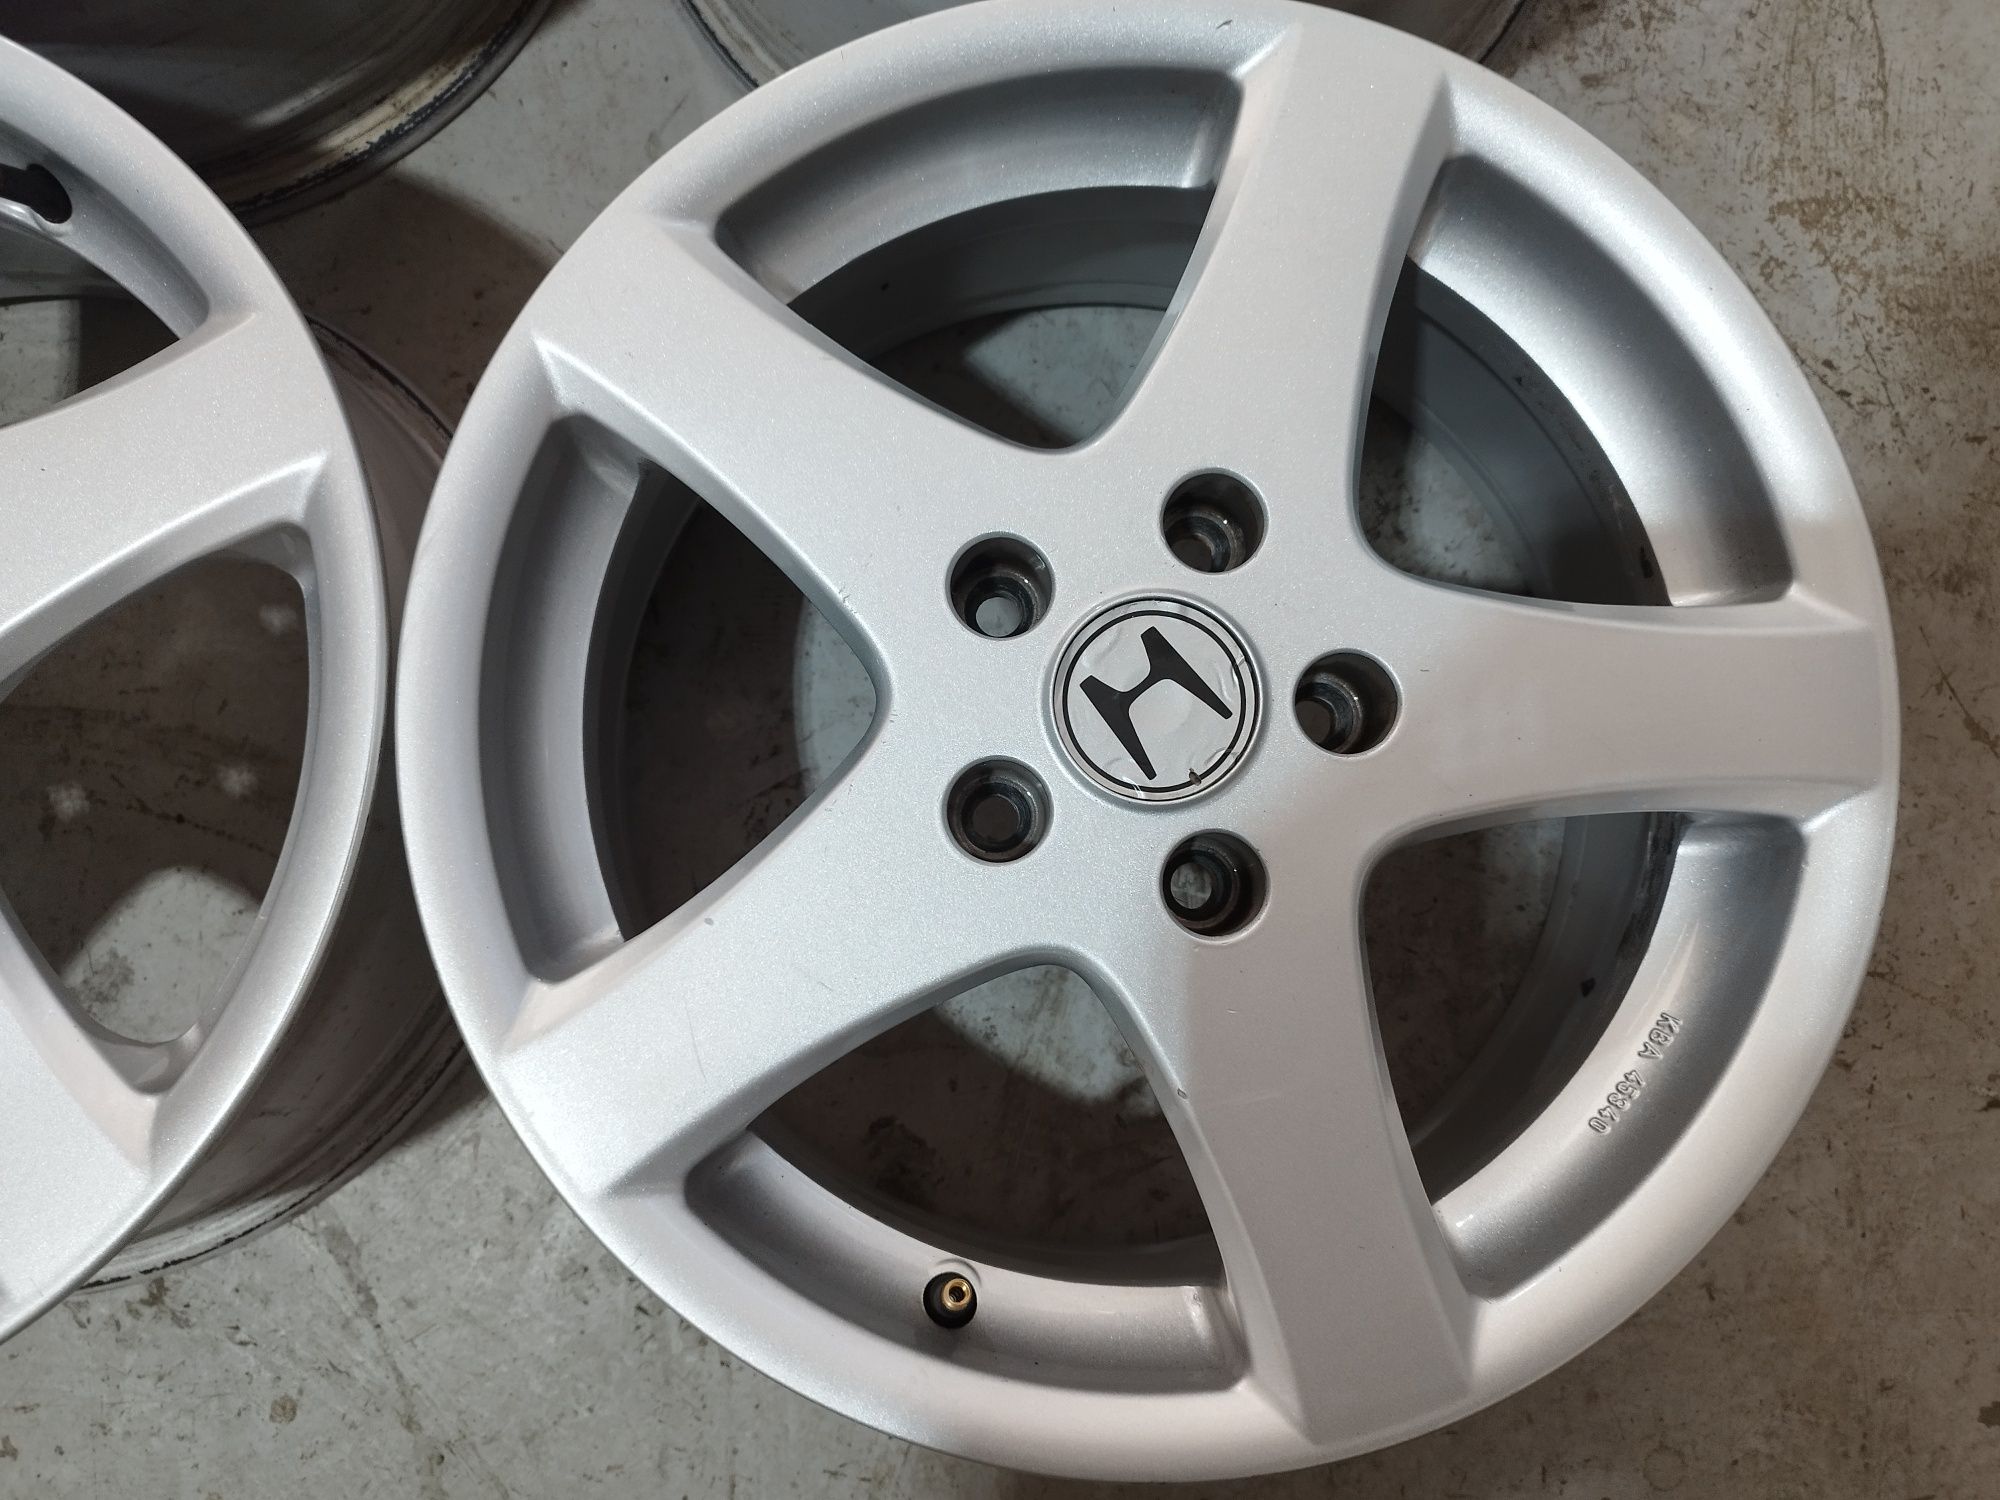 Sat jante 5x114.3 r16 Duster Toyota Mazda Renault